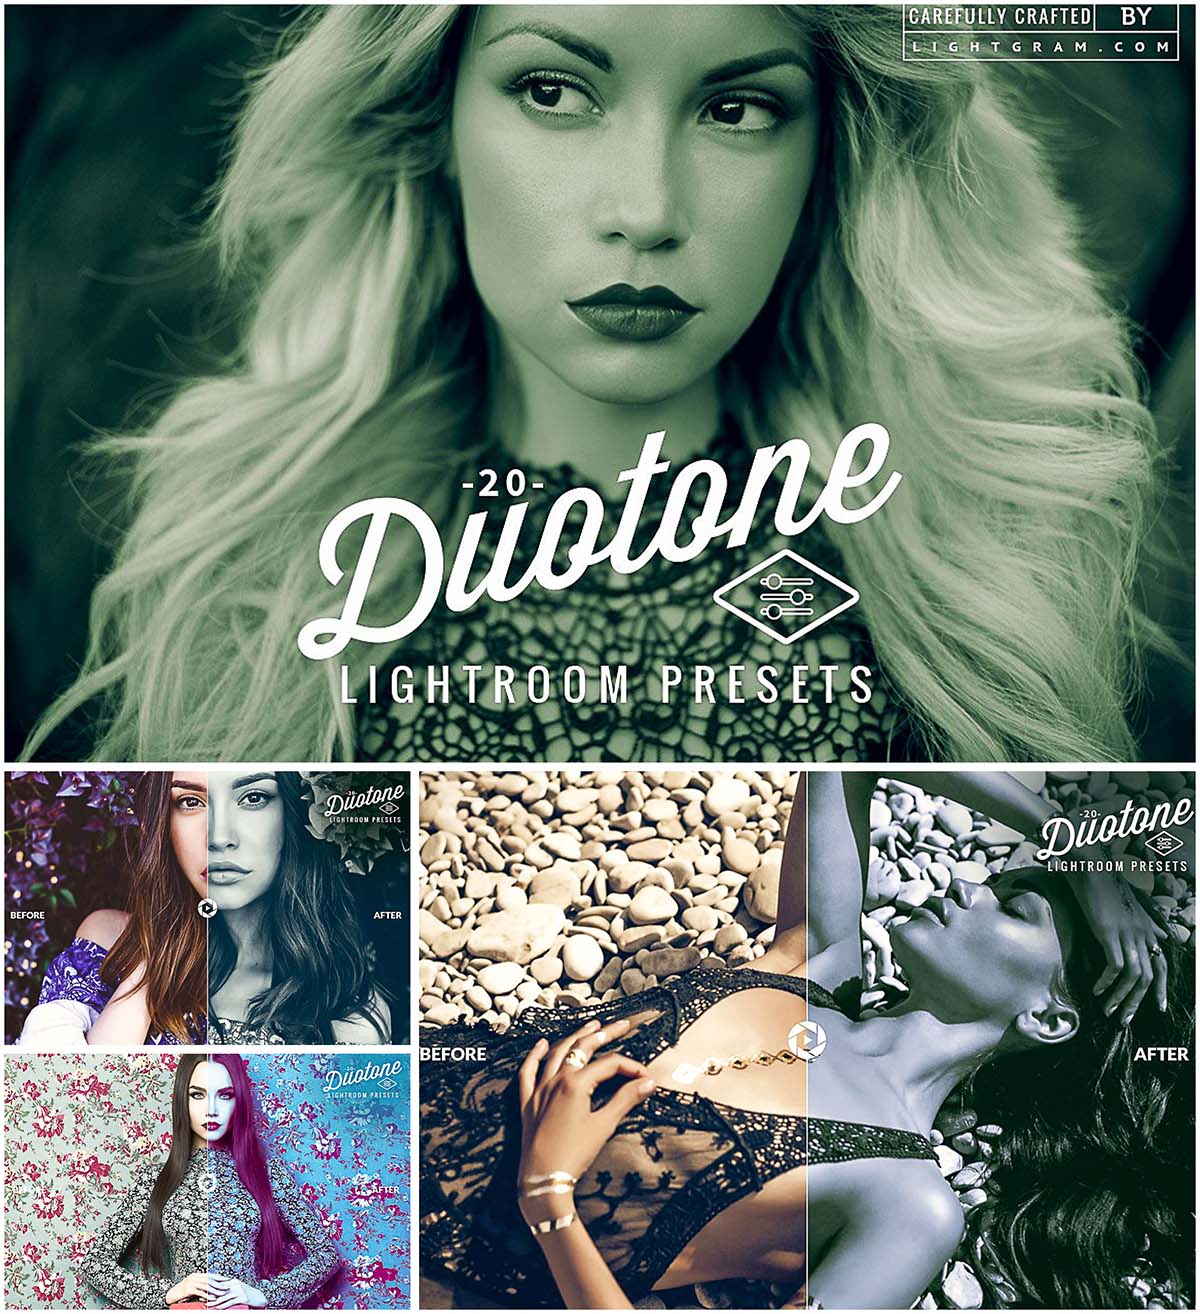 Duotone presets for Lightroom